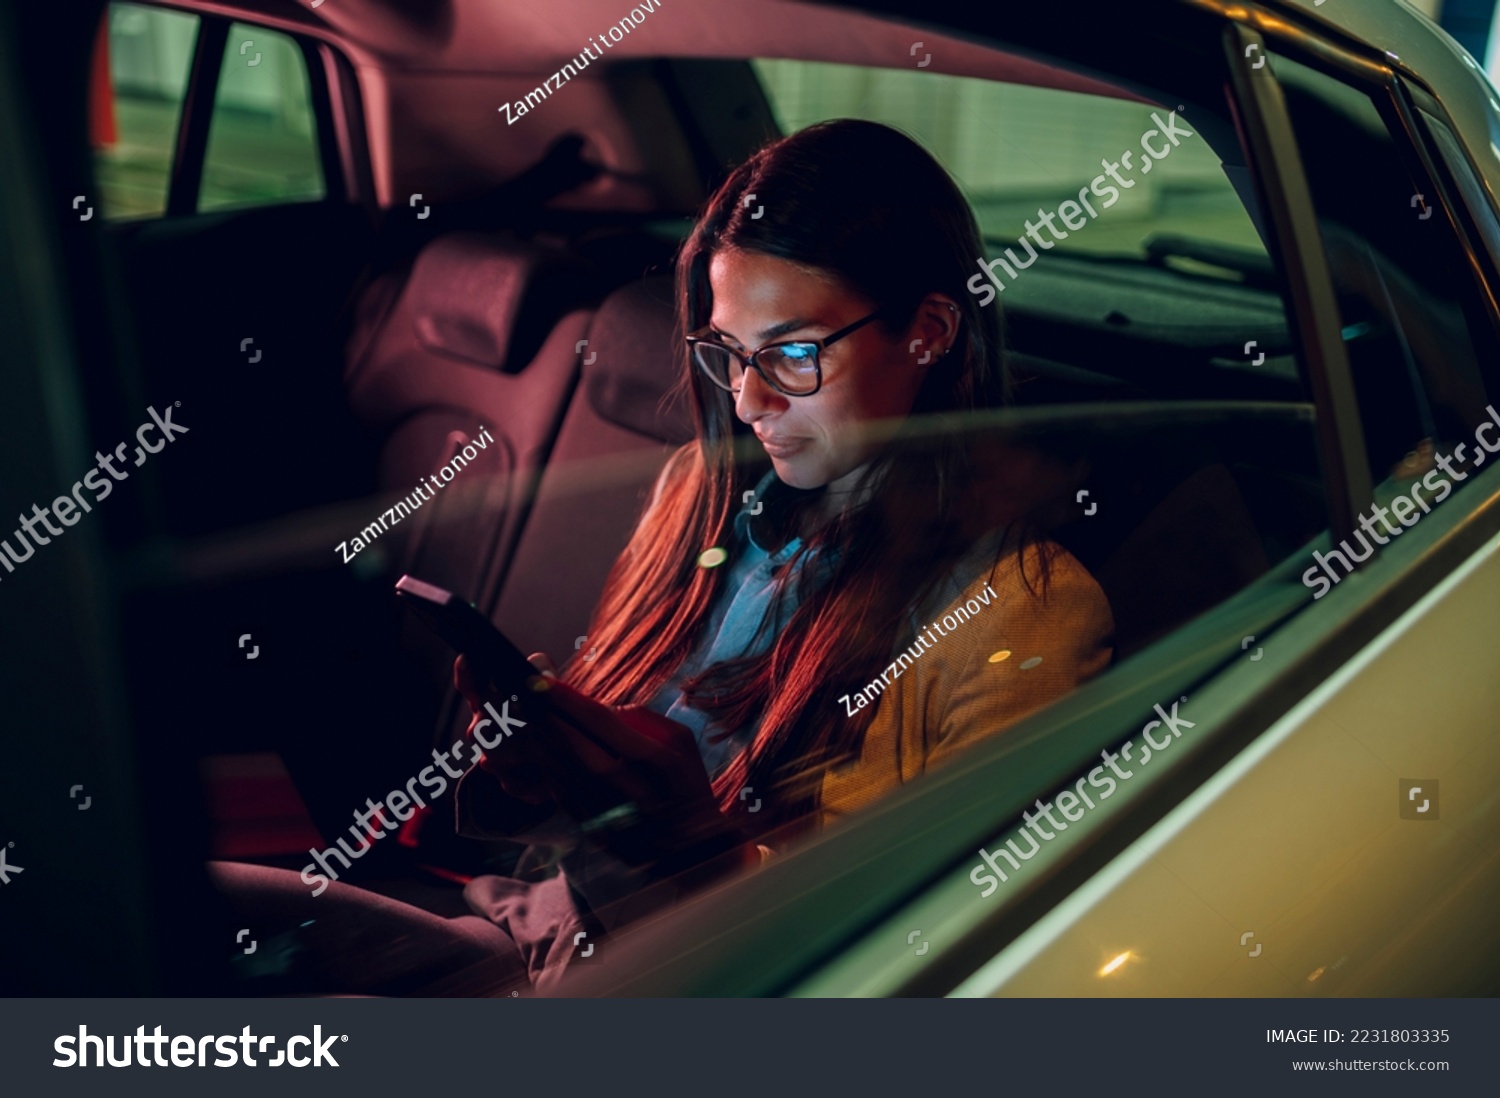 Businesswoman traveling with car on a business trip during night while sitting in a backseat and using a smartphone. Female using mobile phone to send email or messages. View trough car window. #2231803335